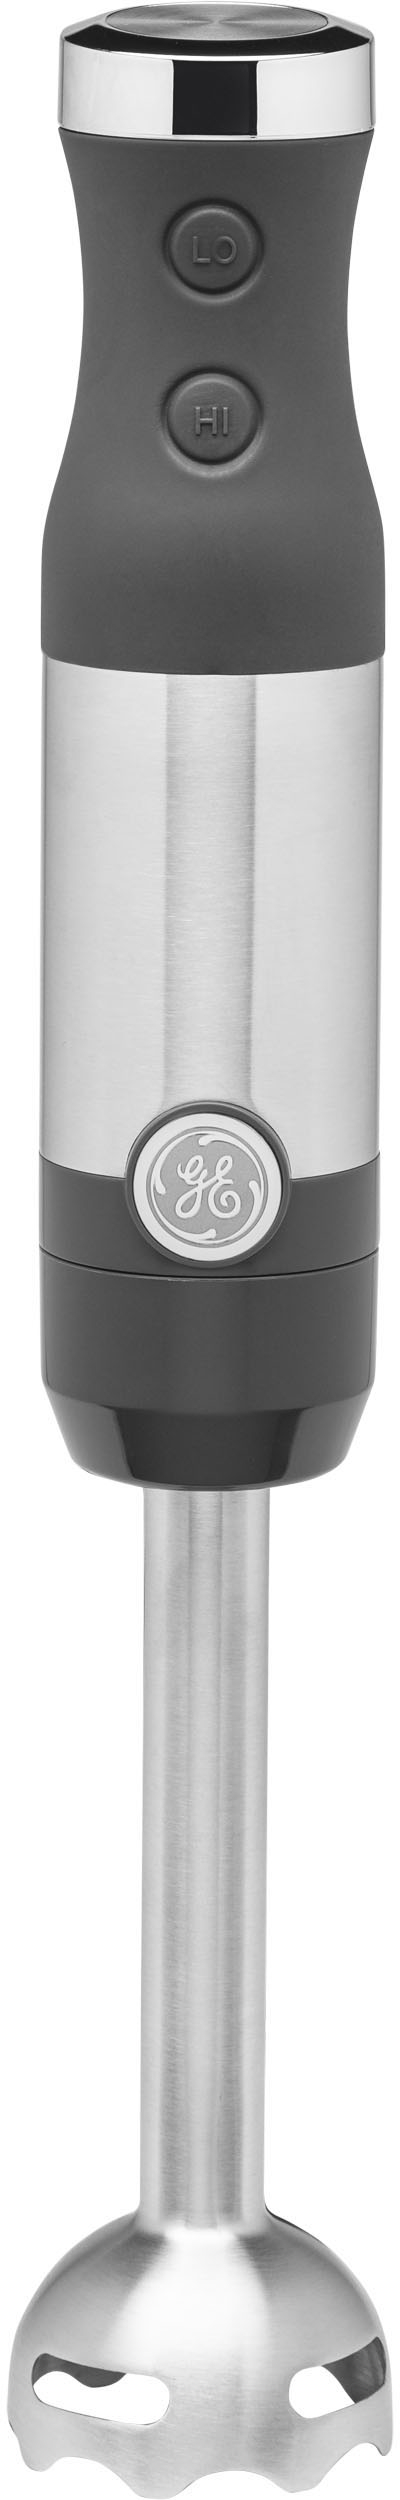 G8H1AASSPSS GE GE Immersion Blender with Accessories